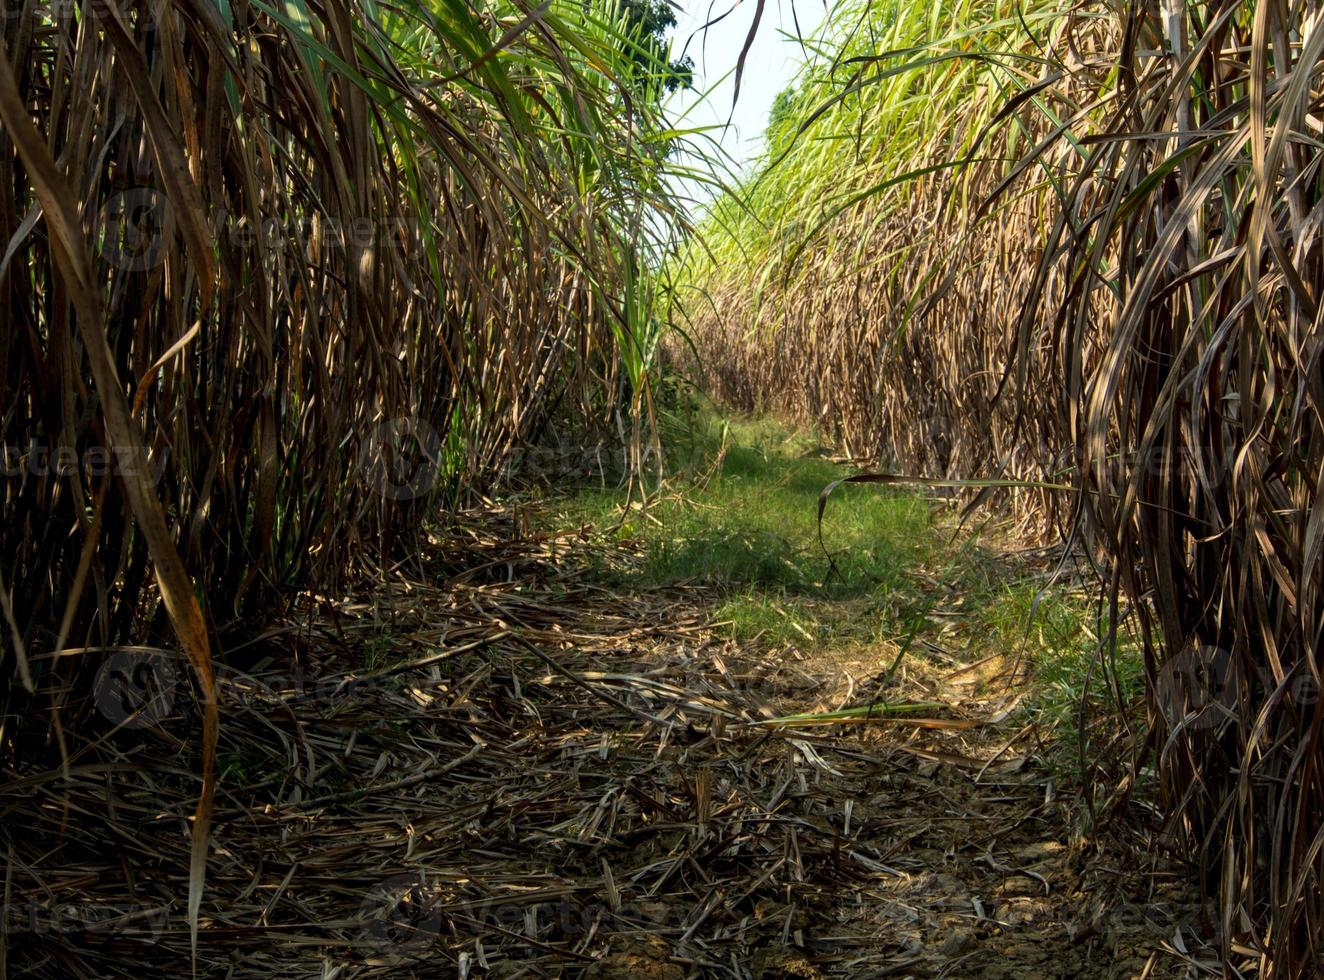 The dry cane leaves and overgrown cane flooded the head during the dirt road of the sugarcane farm photo